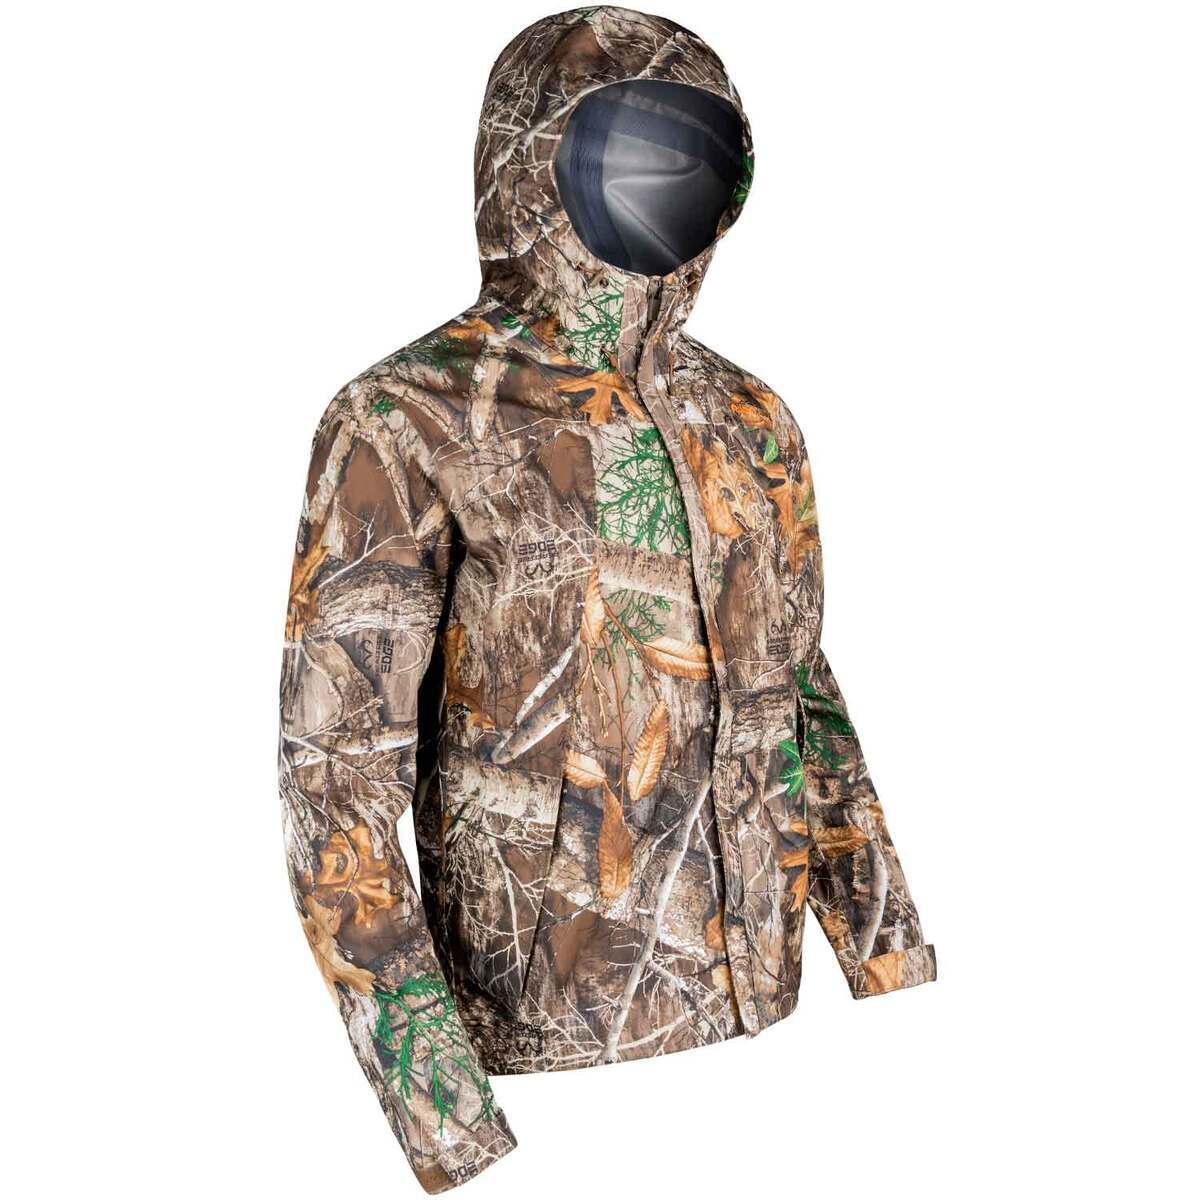 3L Waterproof Breathable Rain Wading Jacket Hooded Outerwear Clothing for Fly Fishing Hunting